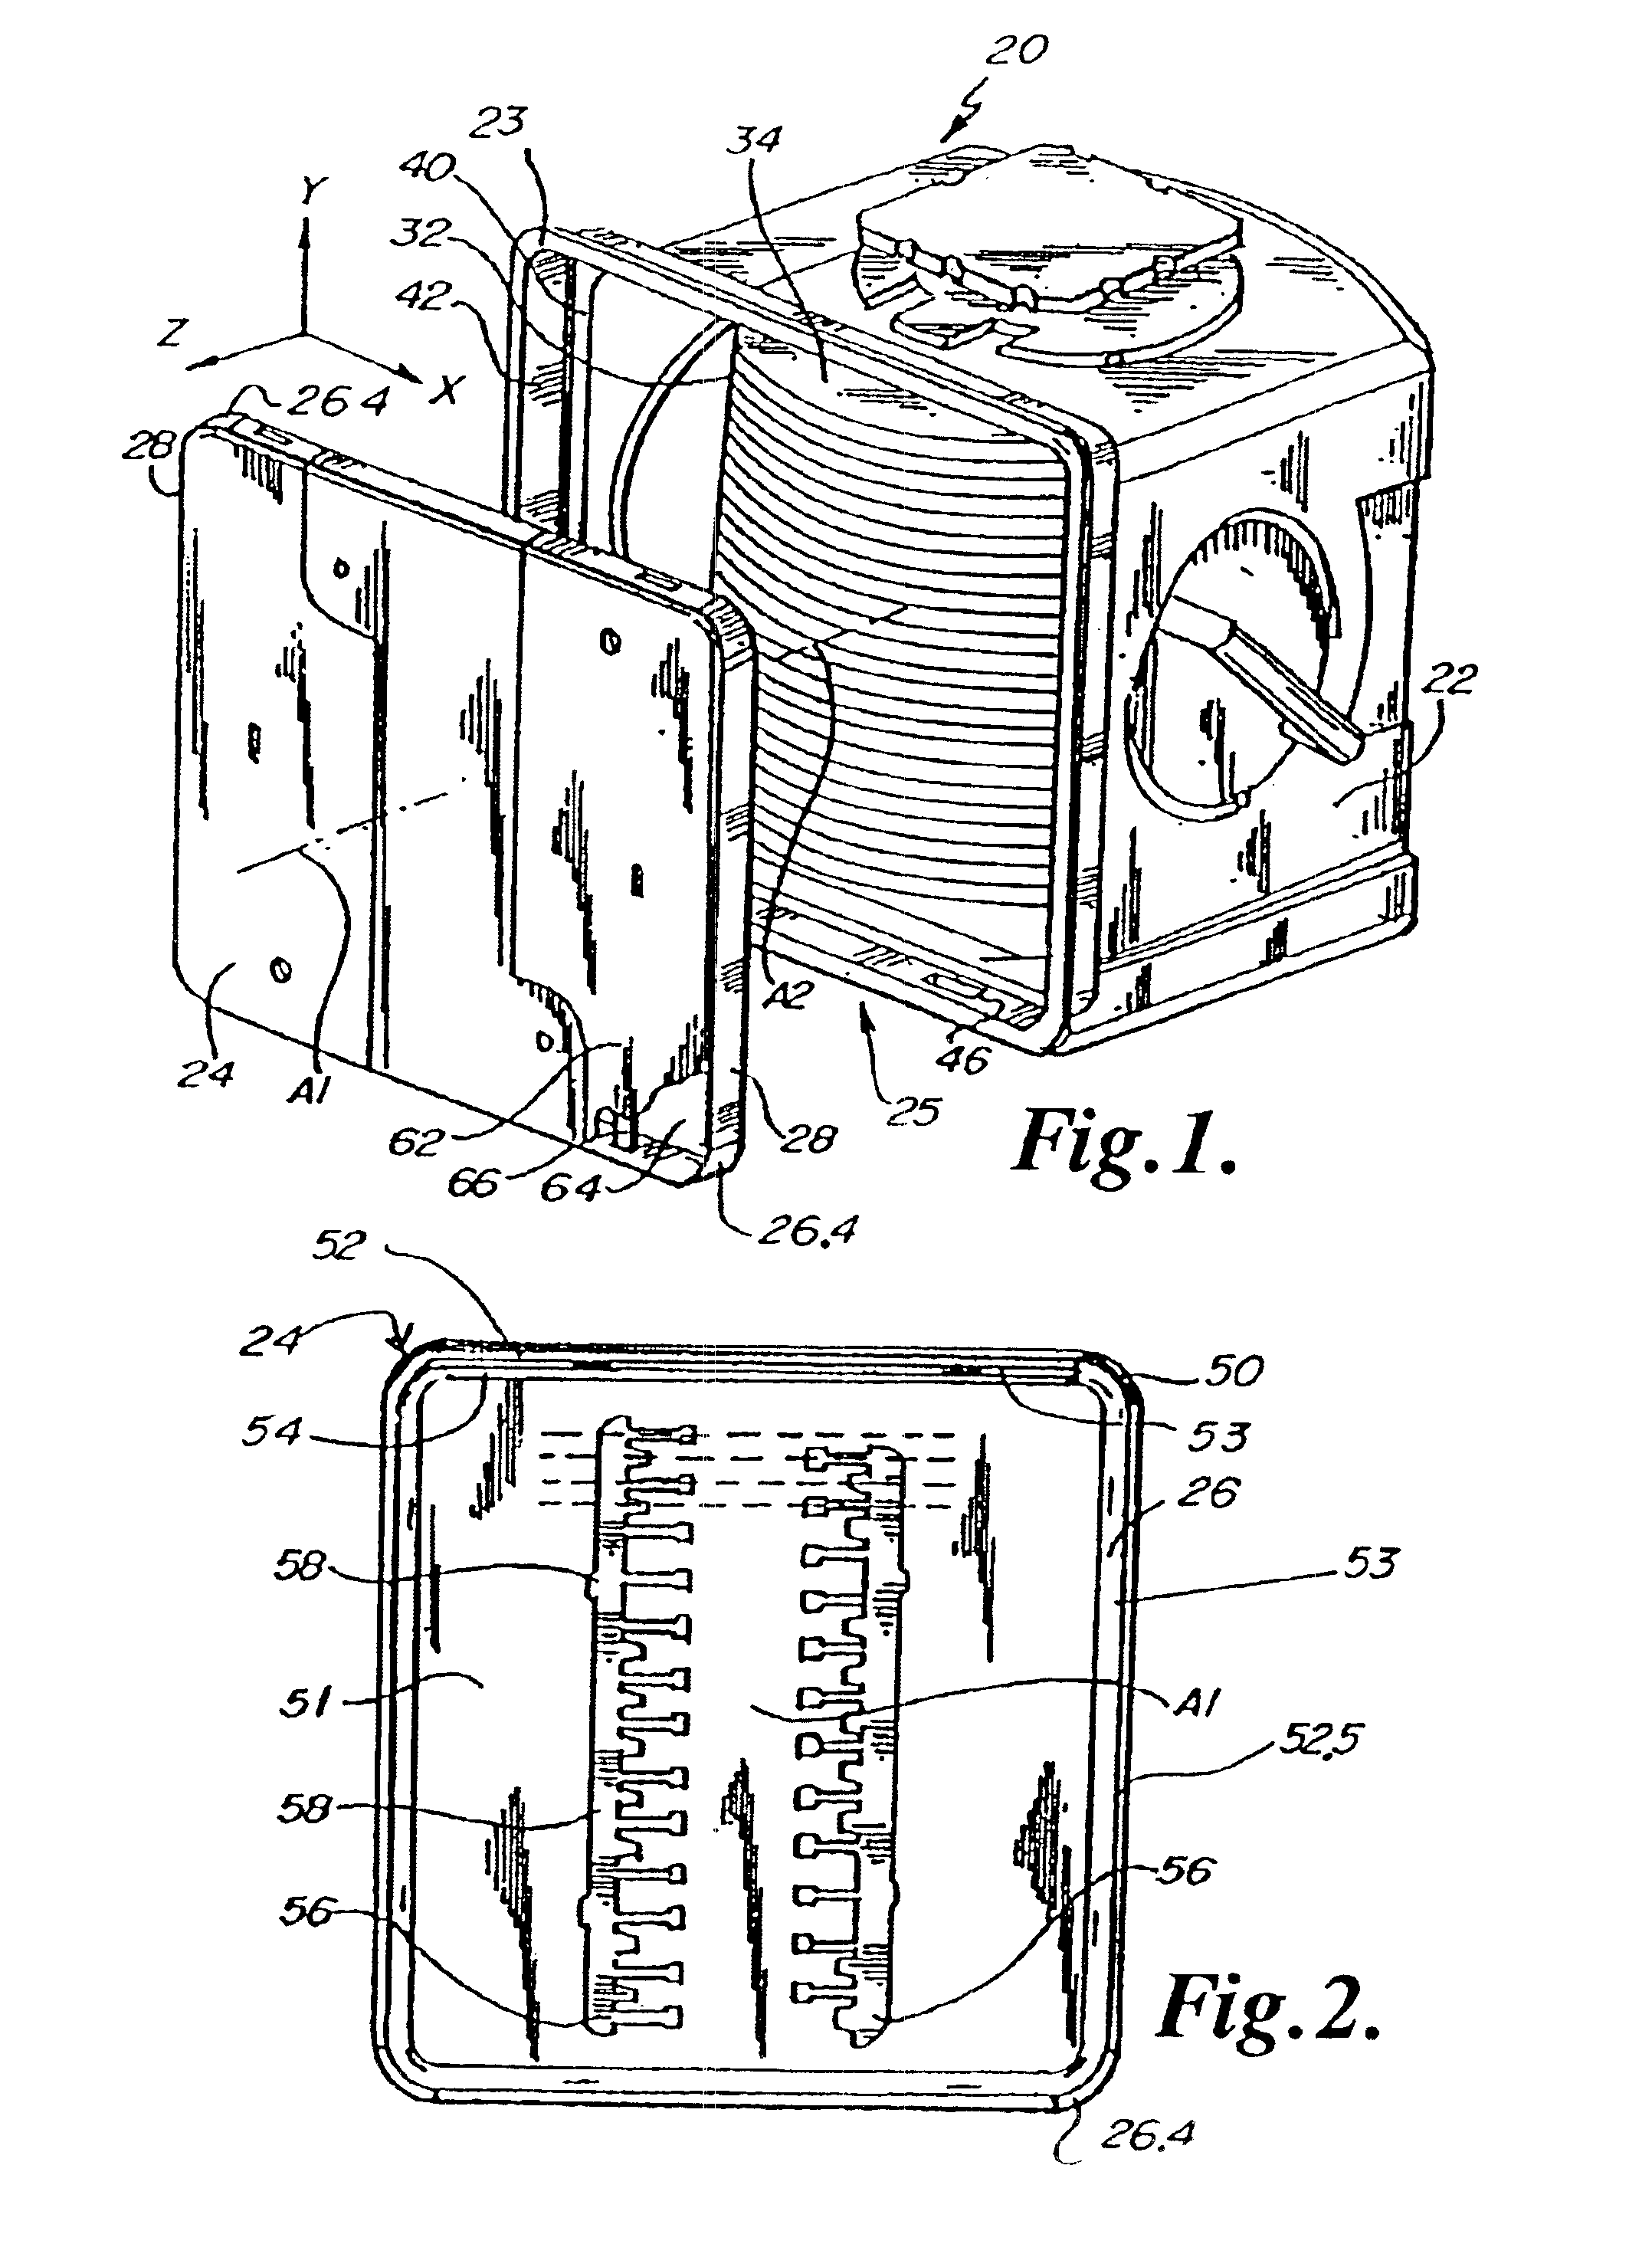 Wafer enclosure sealing arrangement for wafer containers